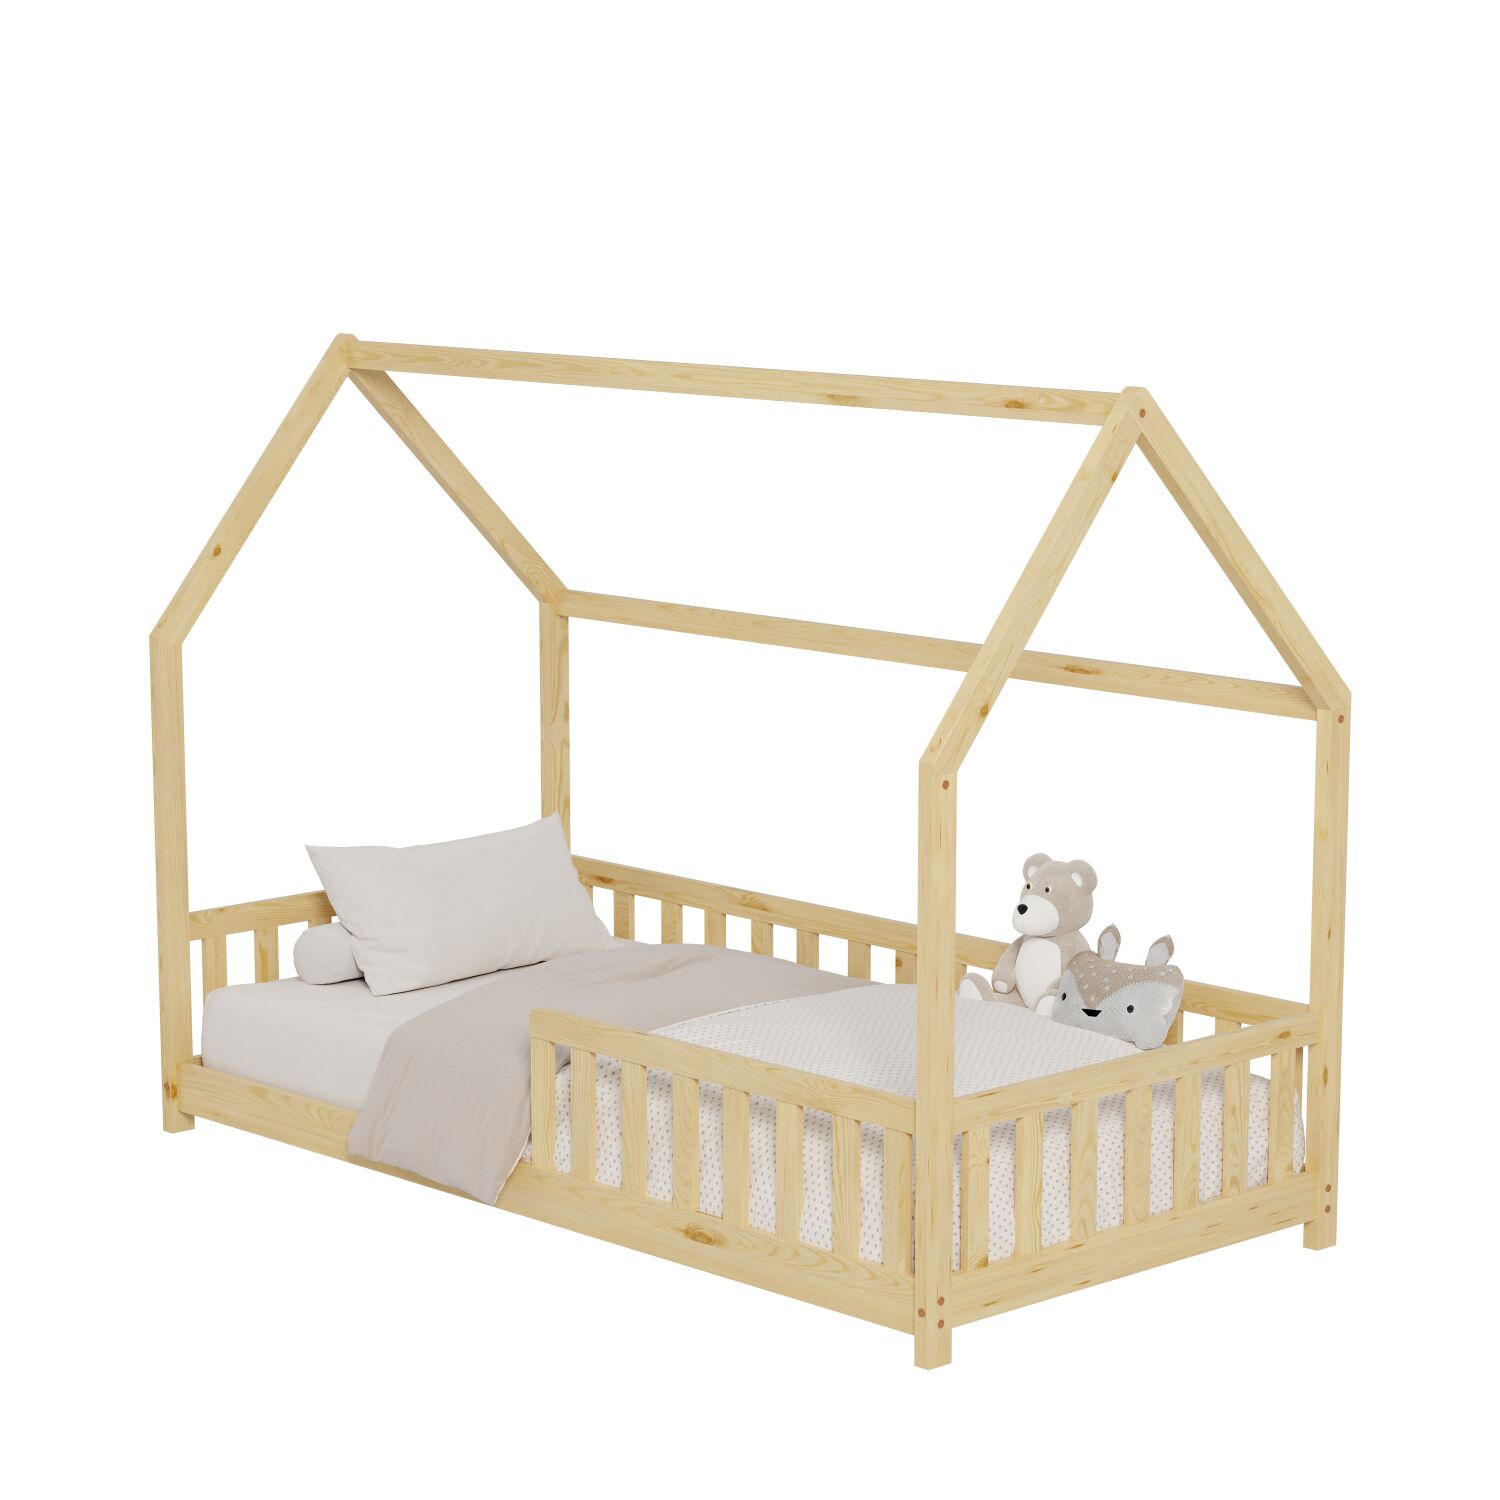 BED FOR KIDS WITH FENCE PHYLLIS HM679.01 t.MONTESSORI SOLID PINE WOOD IN NATURAL- 190x90cm.